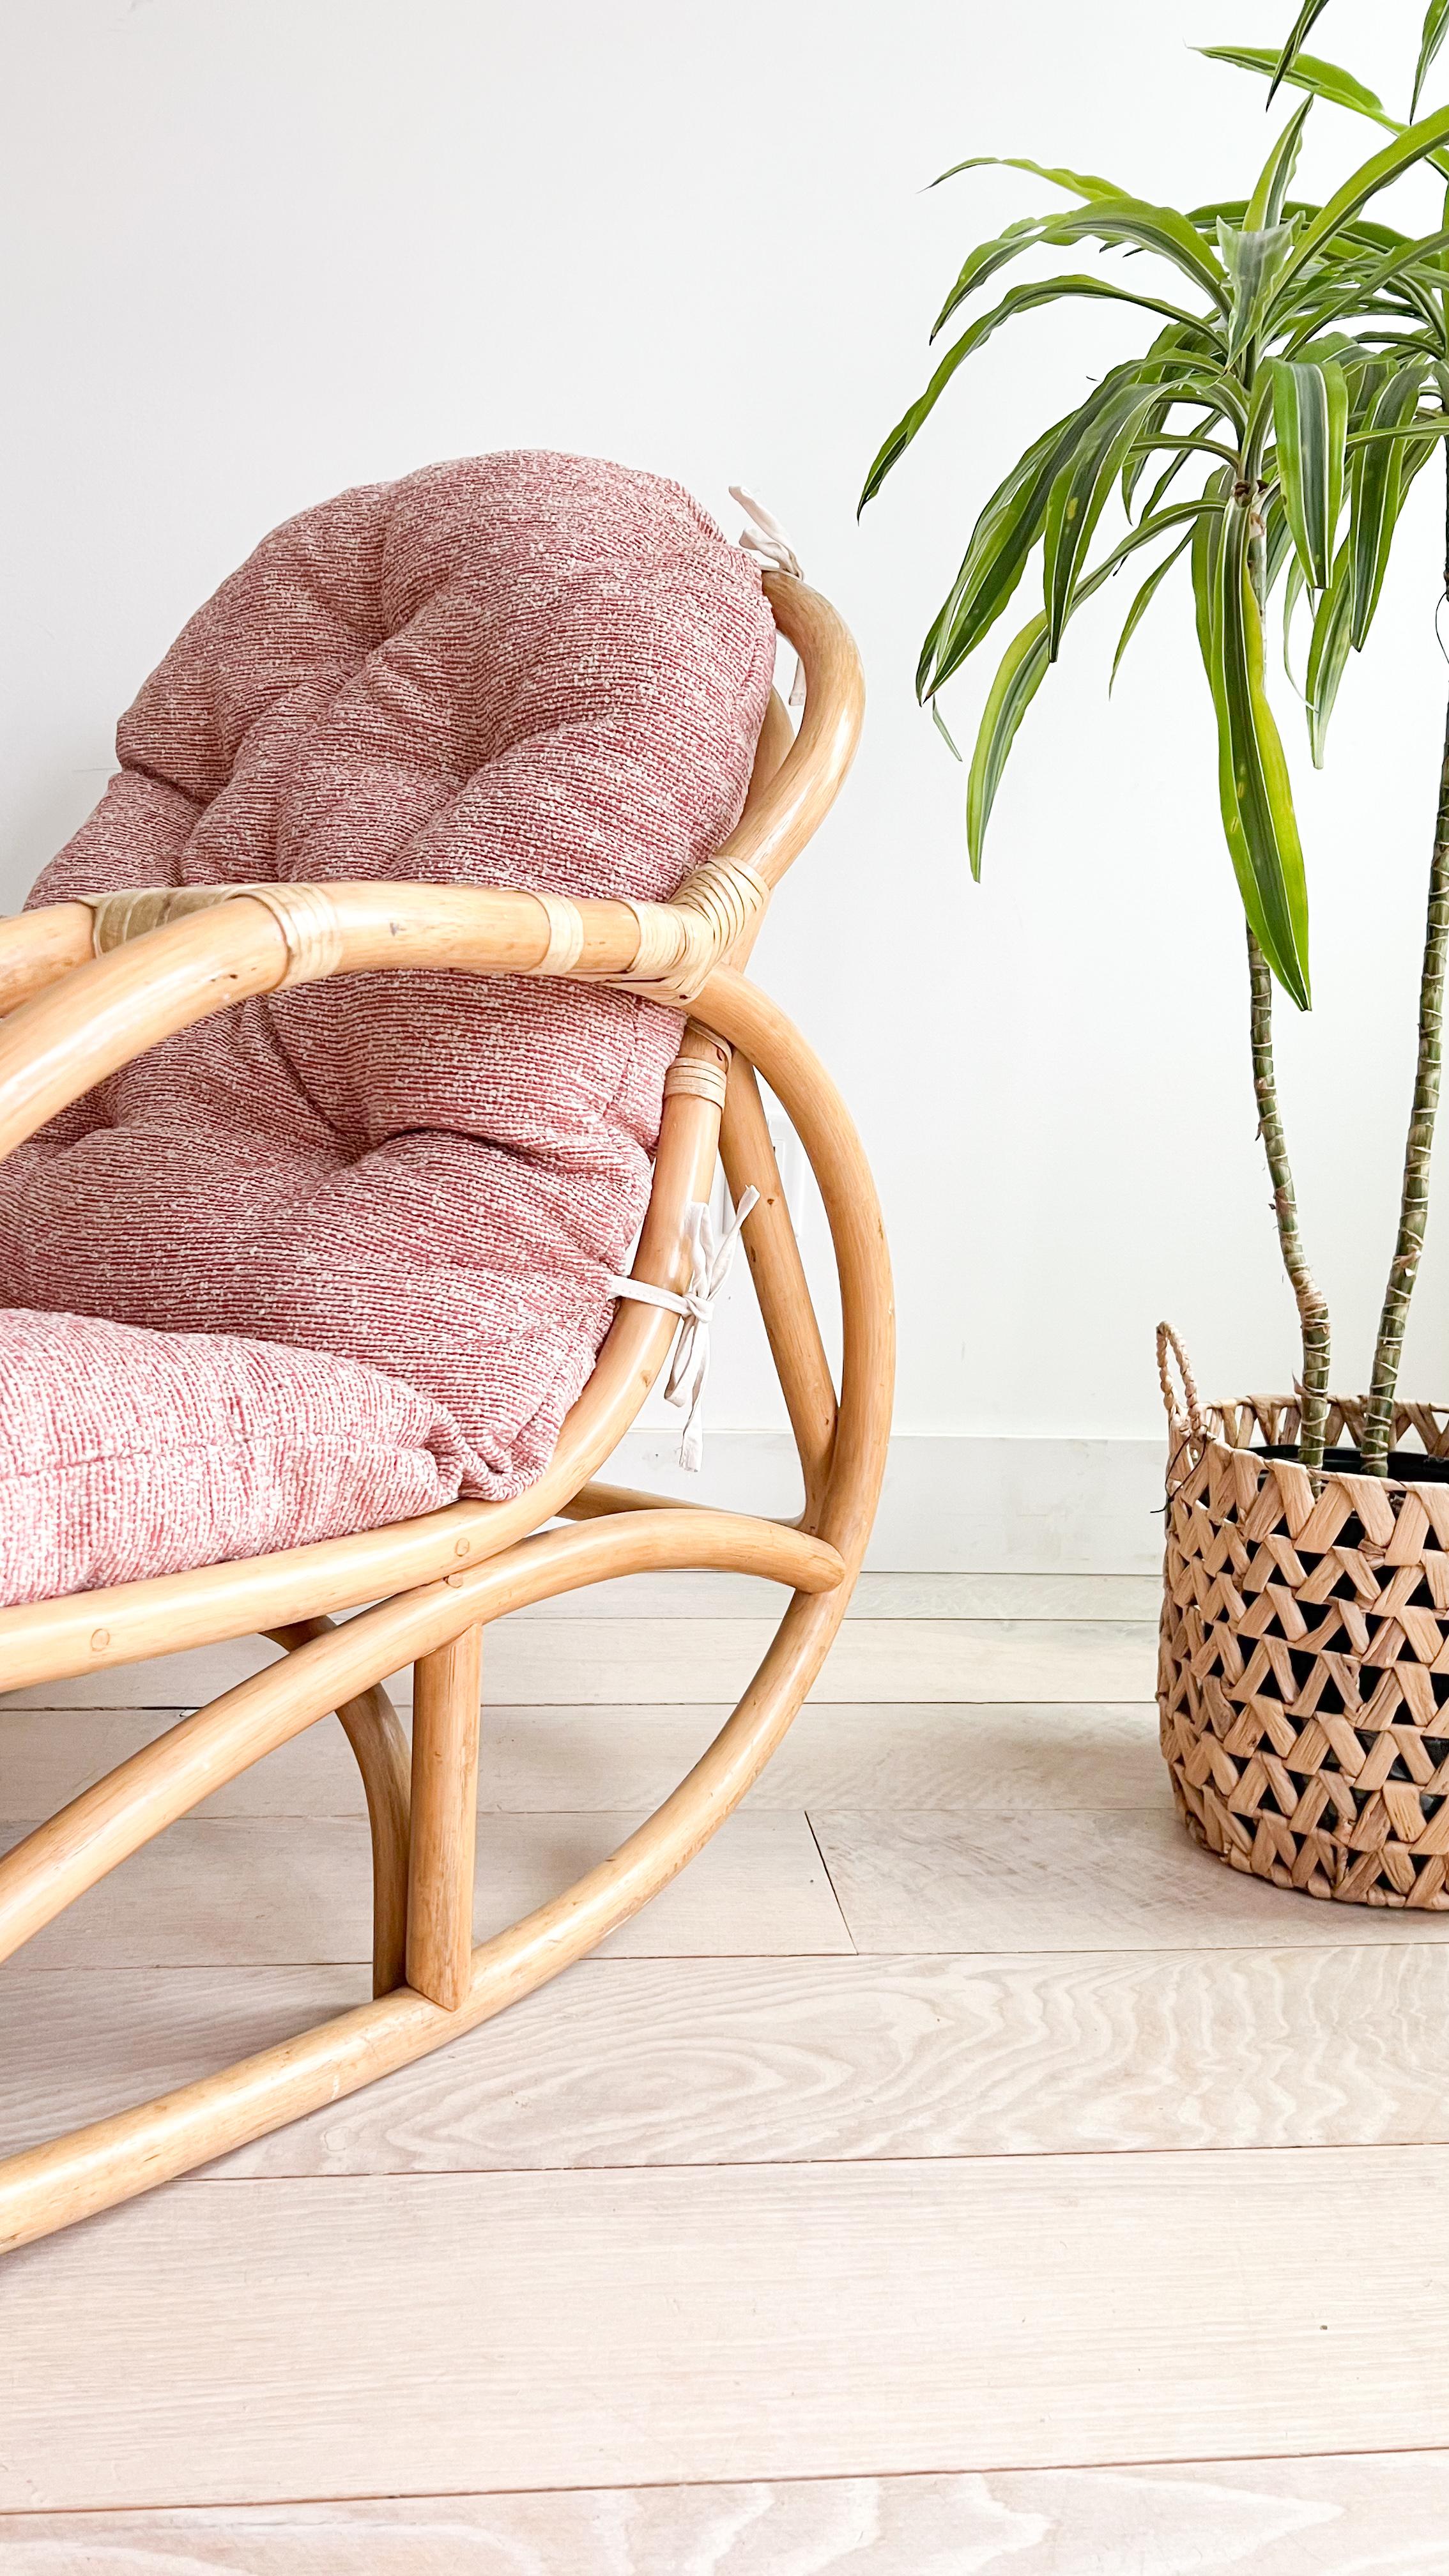 Enhance your space with the timeless appeal of these delightful rattan rocking chairs, inspired by the iconic designs of Viggo Boesen. Featuring fresh pink and white upholstery, these chairs exude warmth and style, perfect for adding a cozy accent